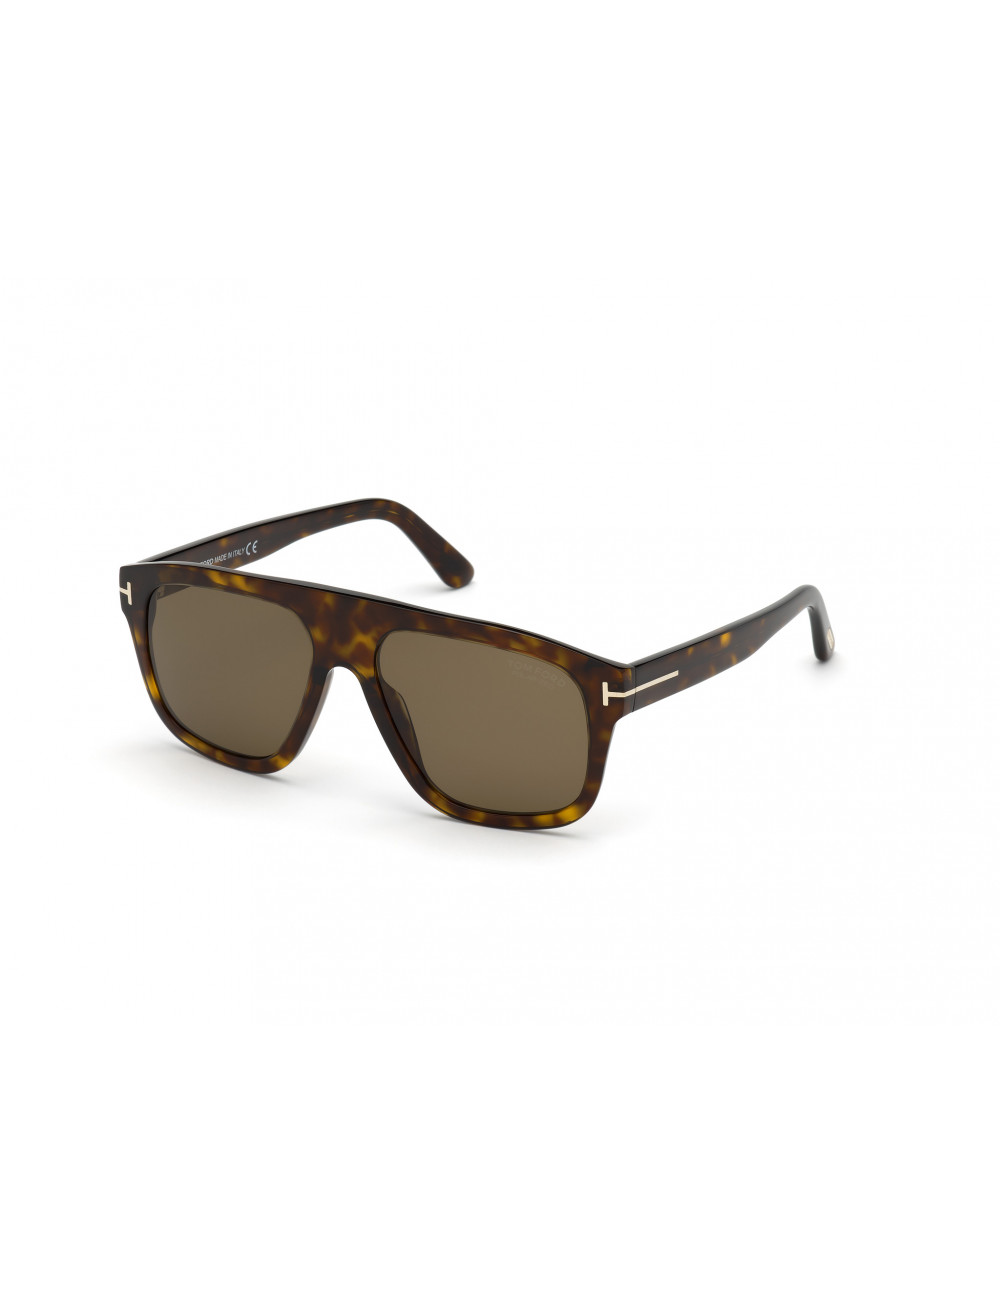 Tom Ford TF 777 52H polarized sunglasses for man 